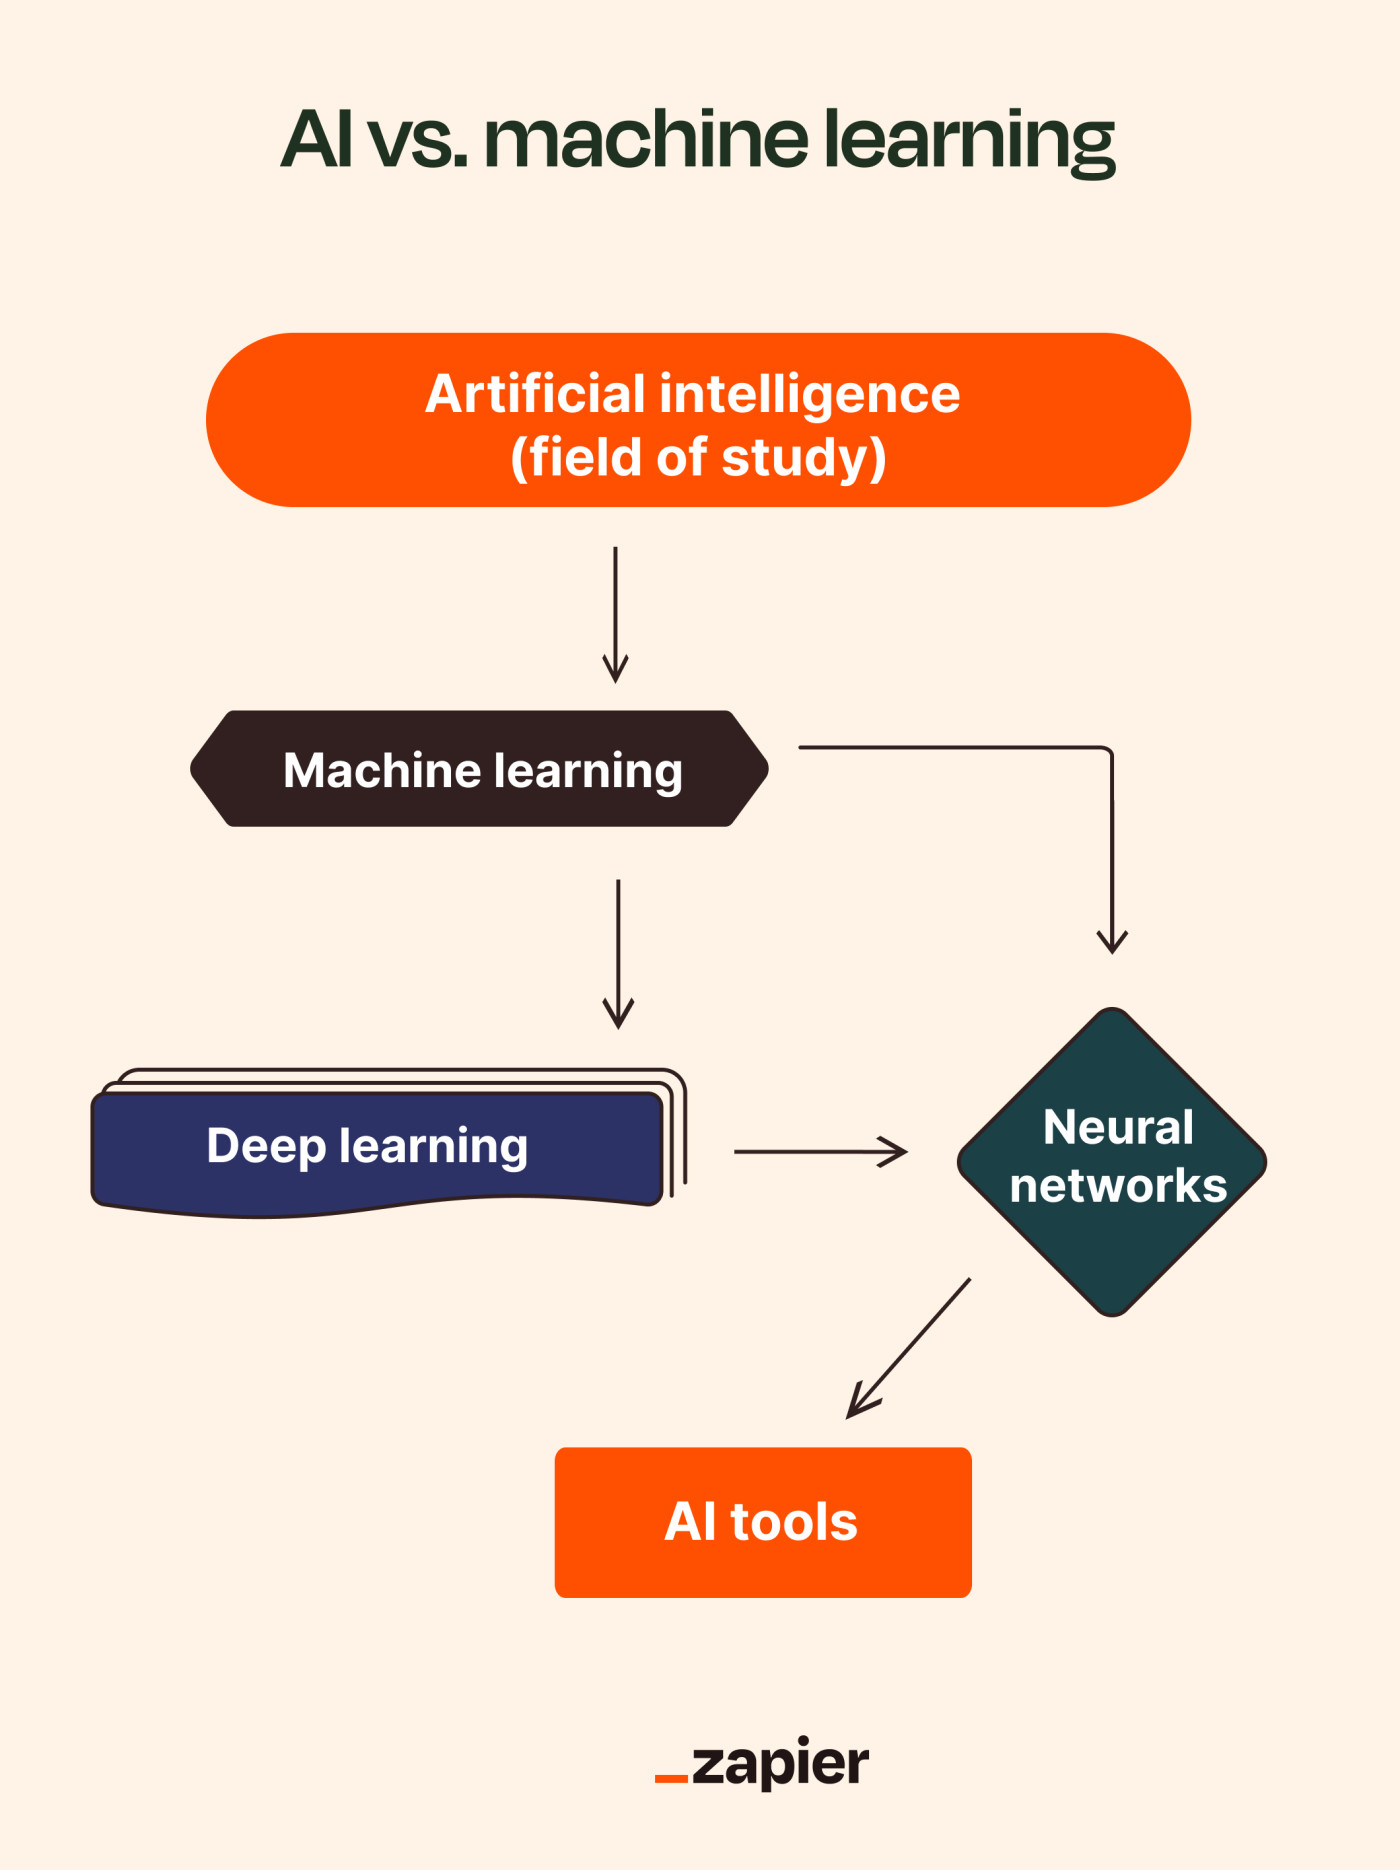 An infographic showing the relationship between AI, machine learning, deep learning, neural networks, and AI tools.